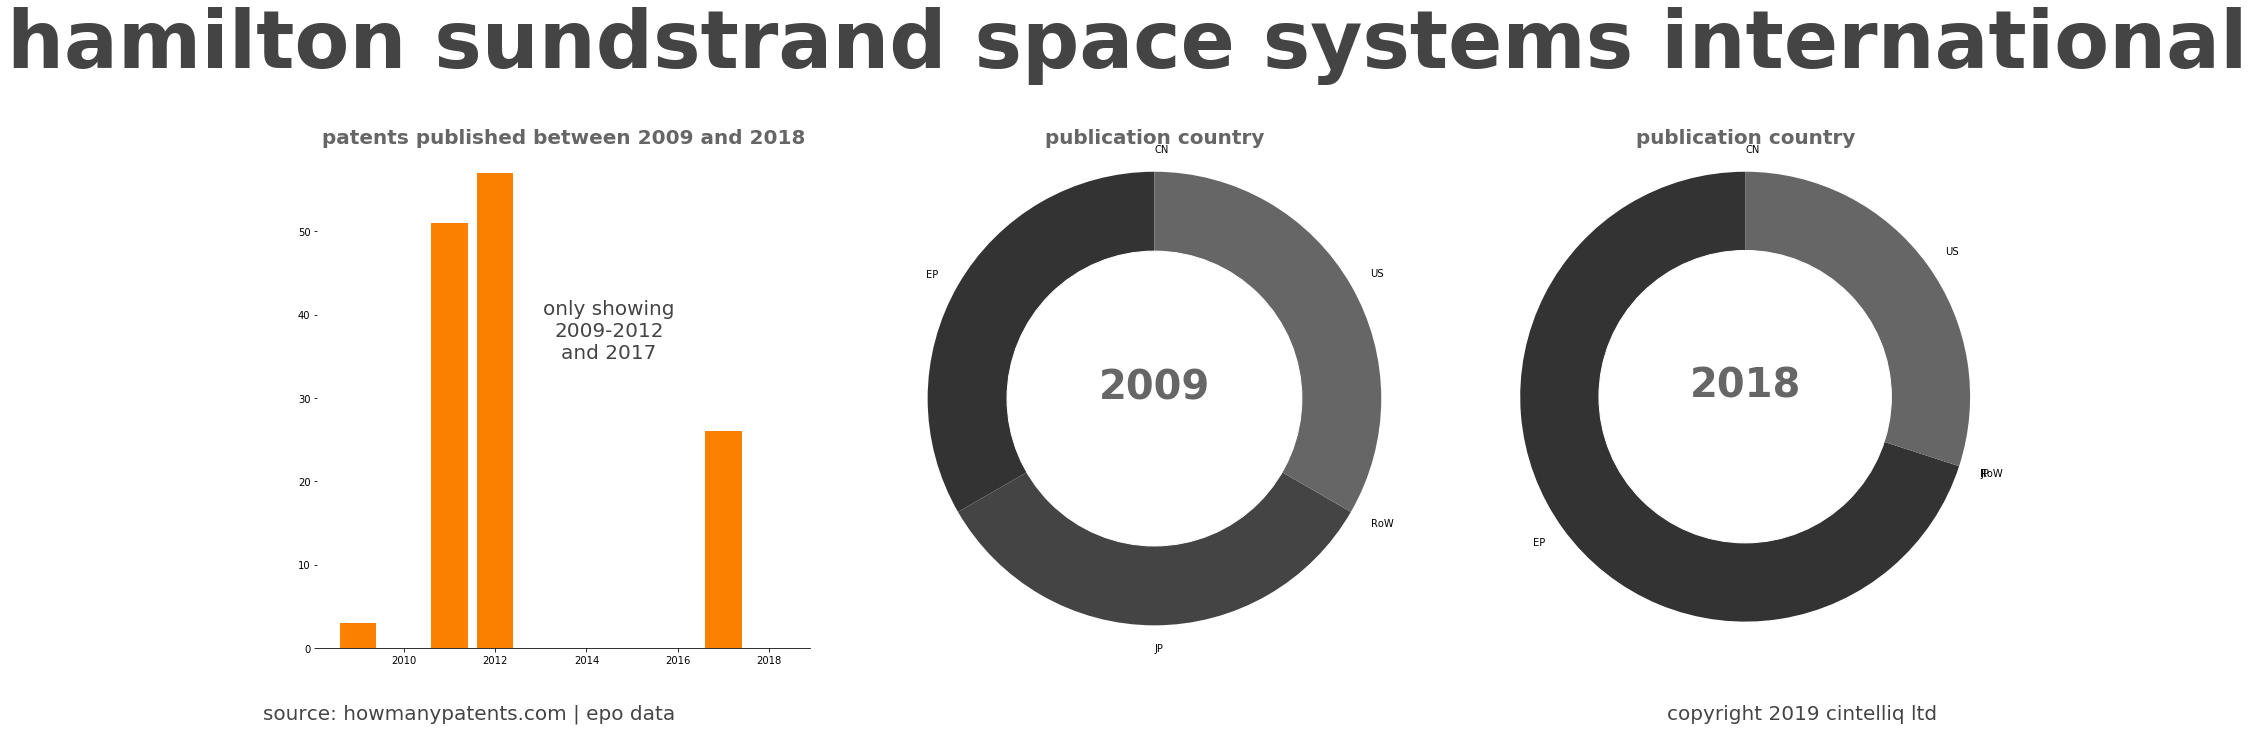 summary of patents for Hamilton Sundstrand Space Systems International